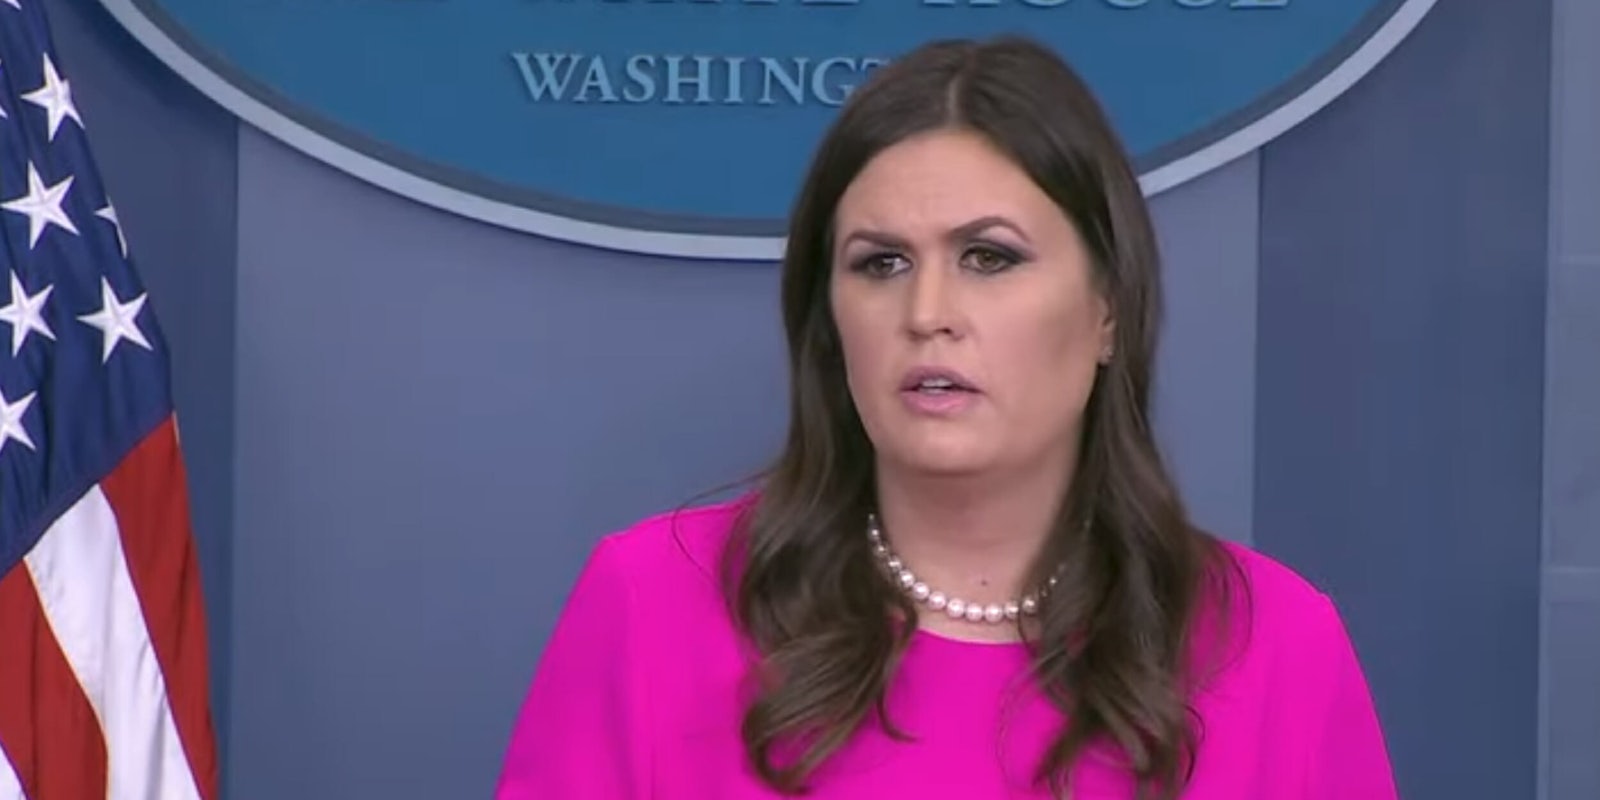 White House Press Secretary Sarah Huckabee Sanders suggested on Tuesday that President Donald Trump would be able to accomplish more of his agenda if Congress stopped taking vacations.